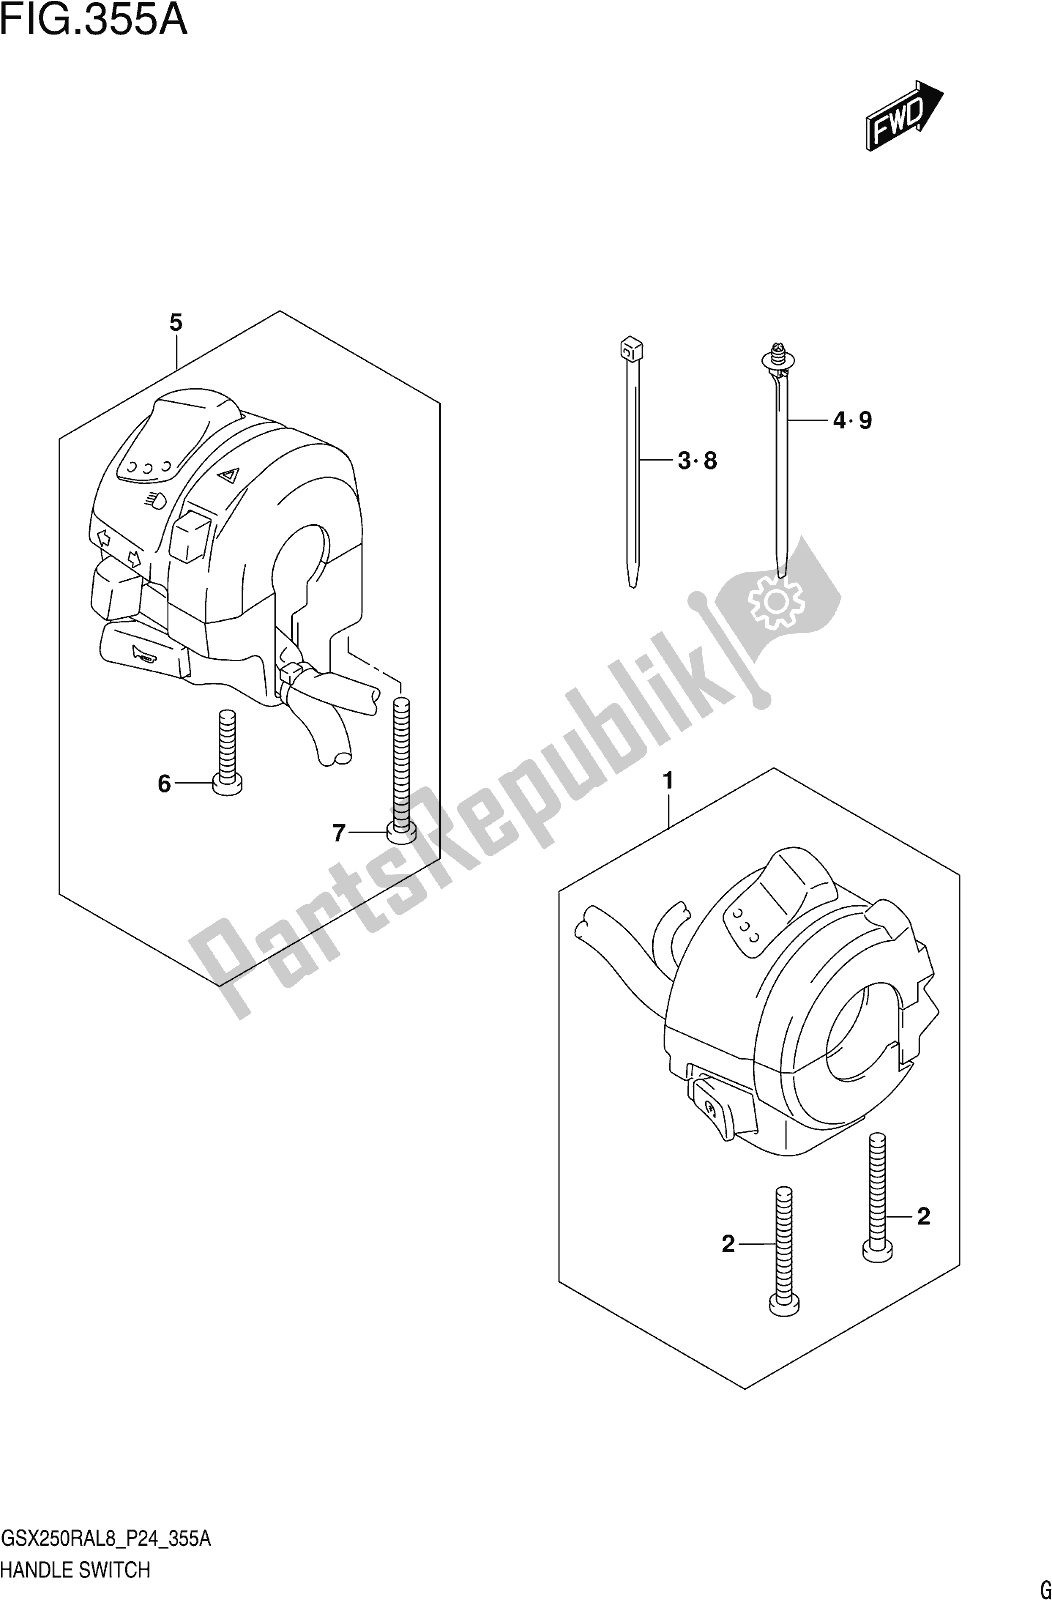 All parts for the Fig. 355a Handle Switch of the Suzuki GW 250 RAZ 2018